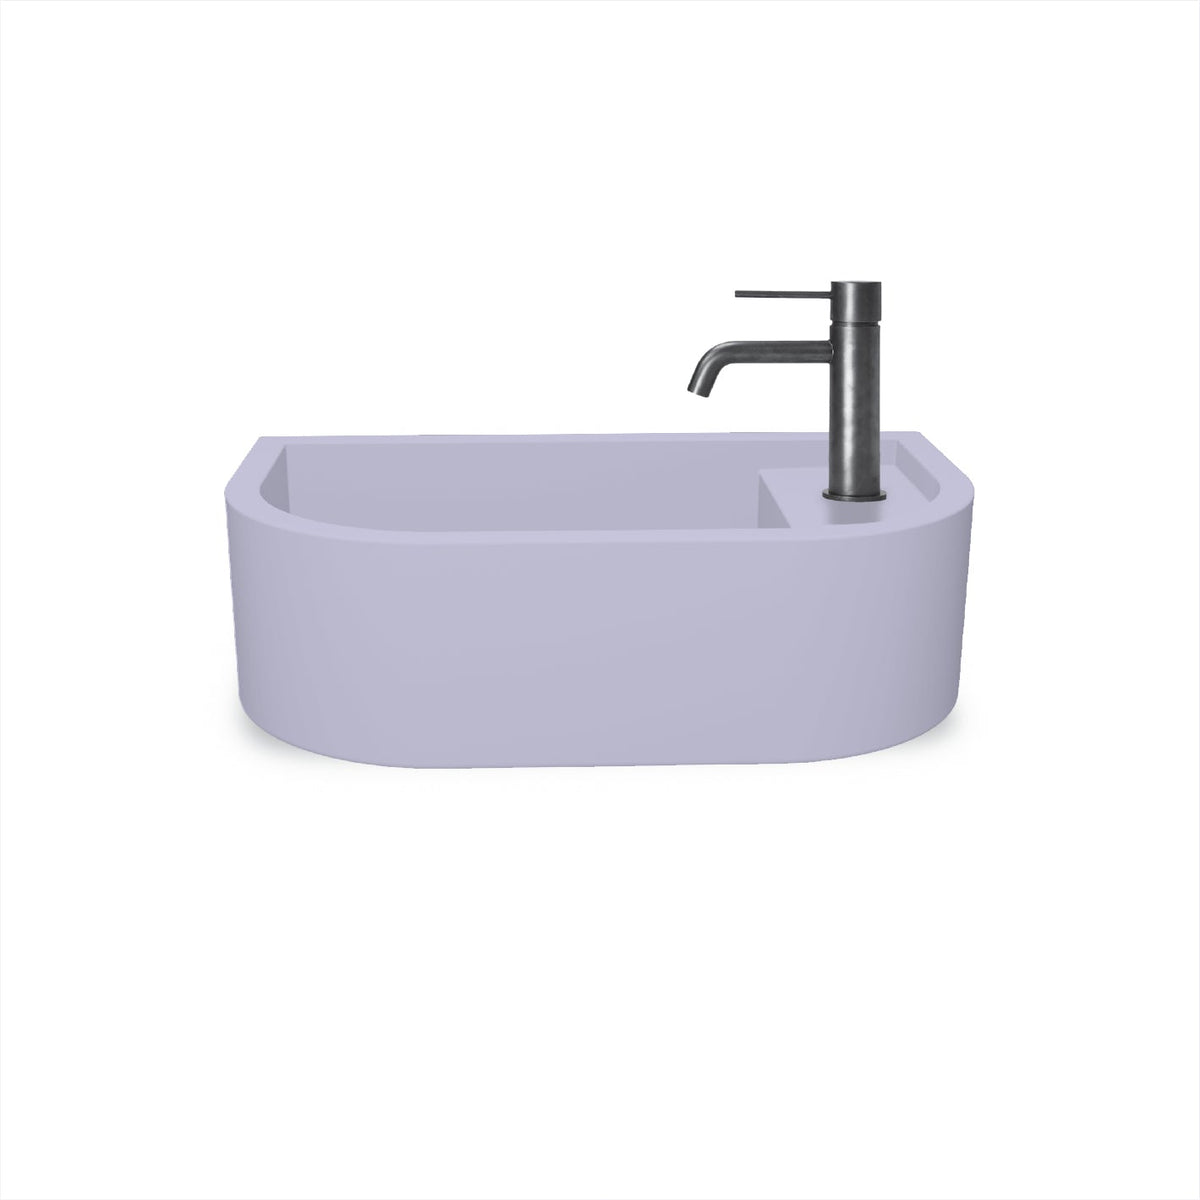 Loop 01 Basin - Overflow - Wall Hung (Lilac,Tap Hole,White)